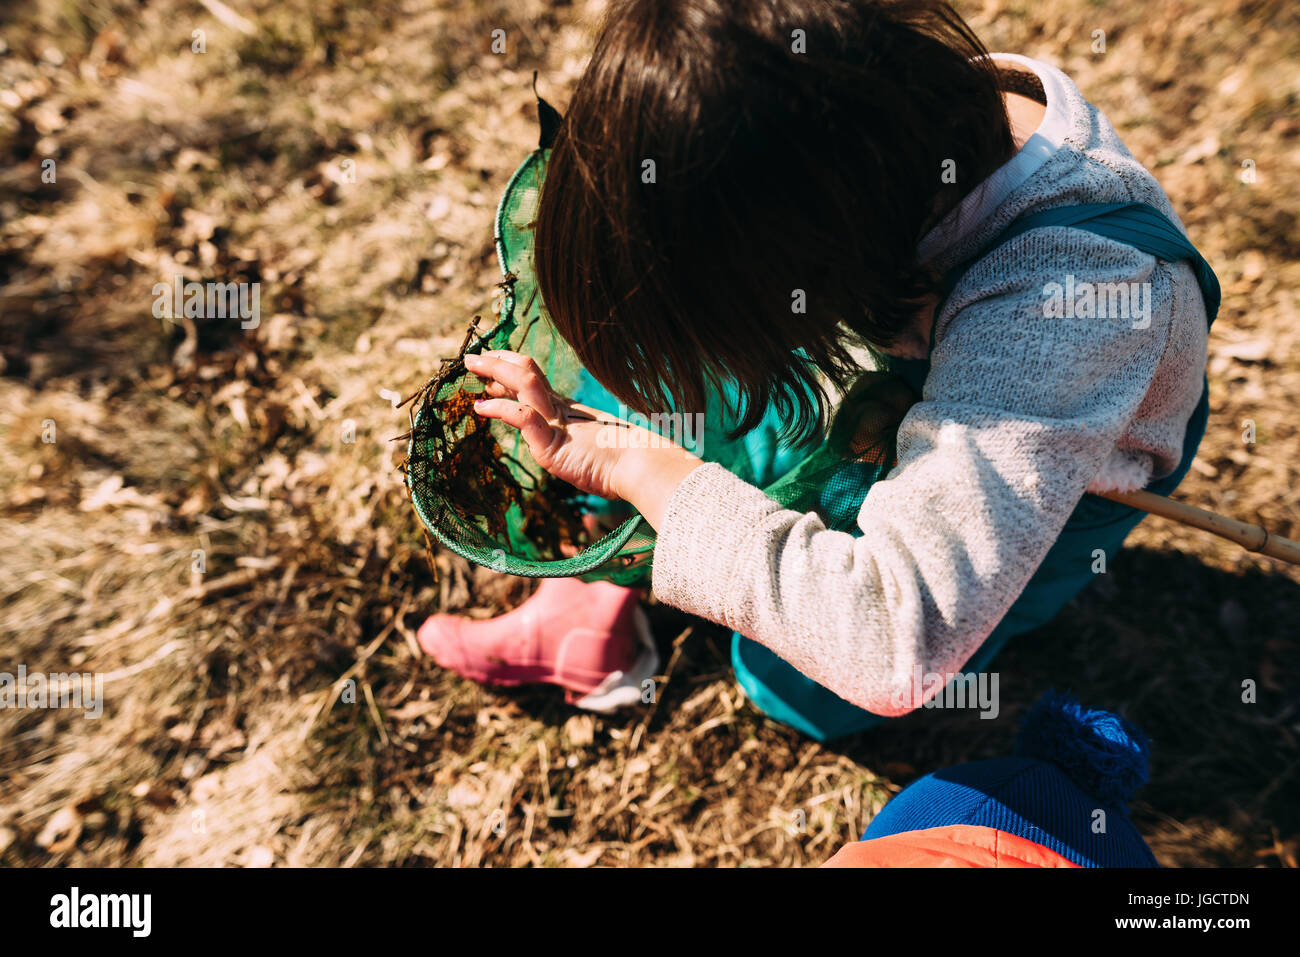 Girl looking at water bugs in a fishing net Stock Photo